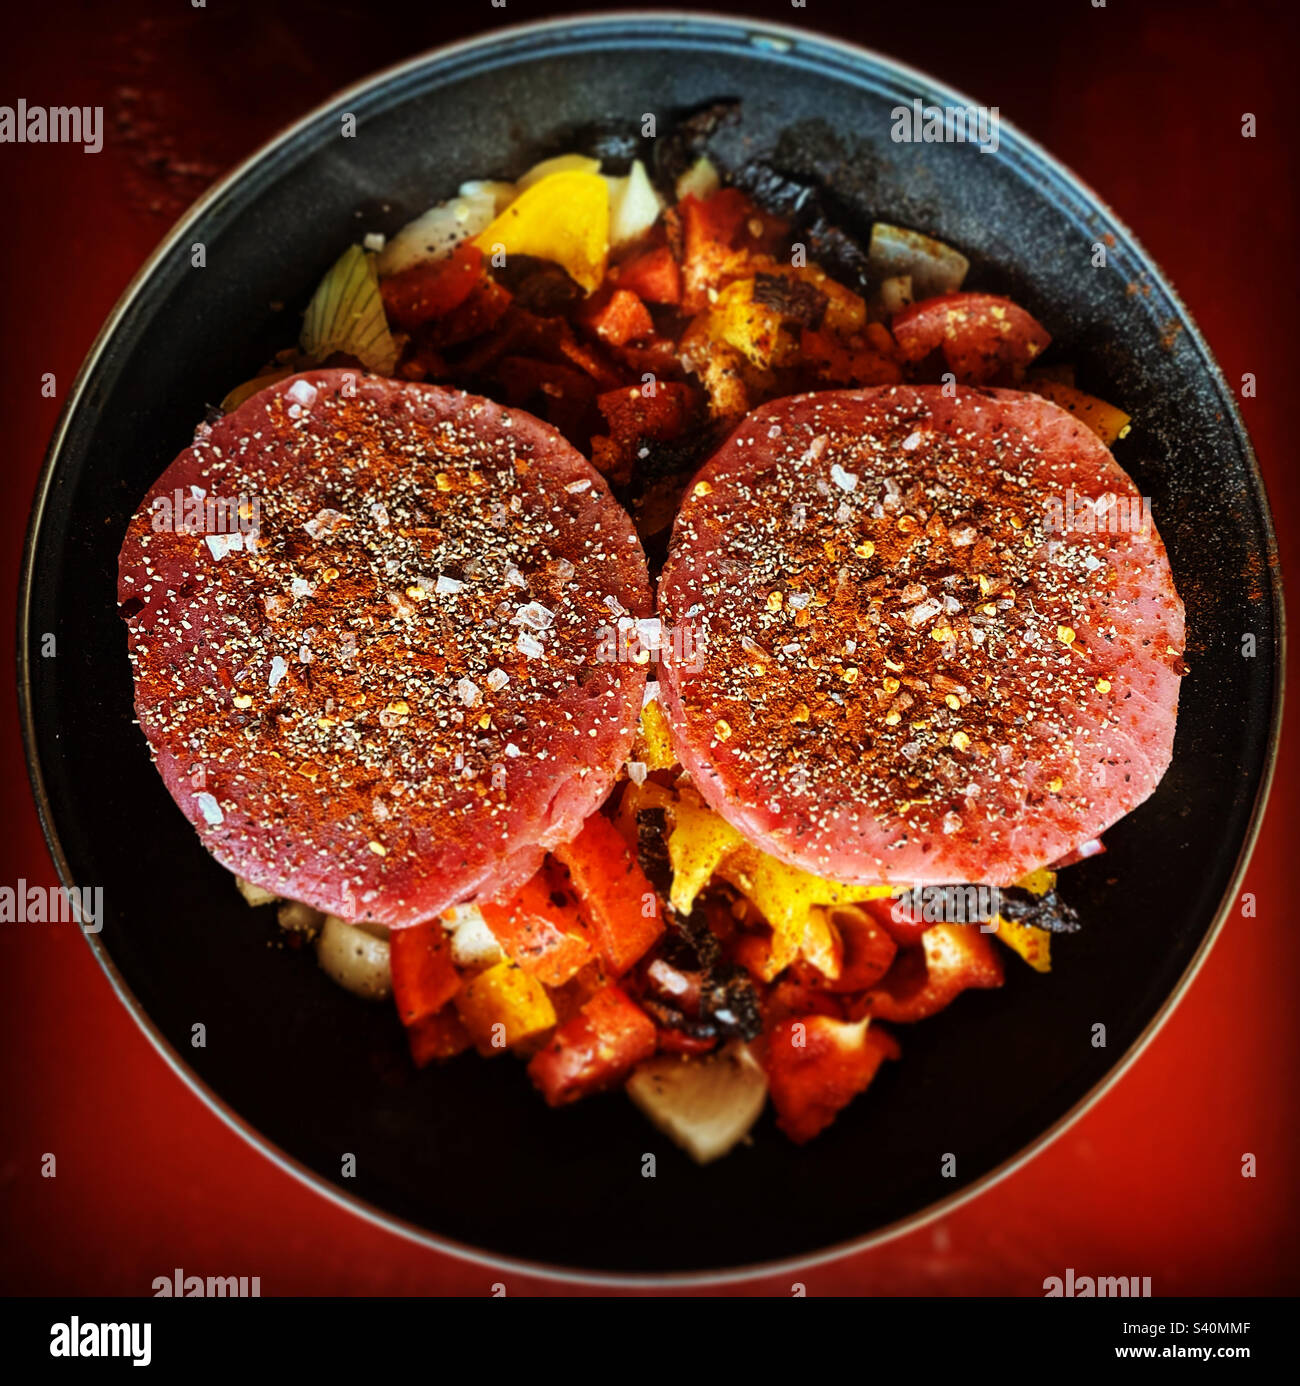 Two tuna pieces with herbs and sweet peppers cooking in Queretaro, Mexico Stock Photo